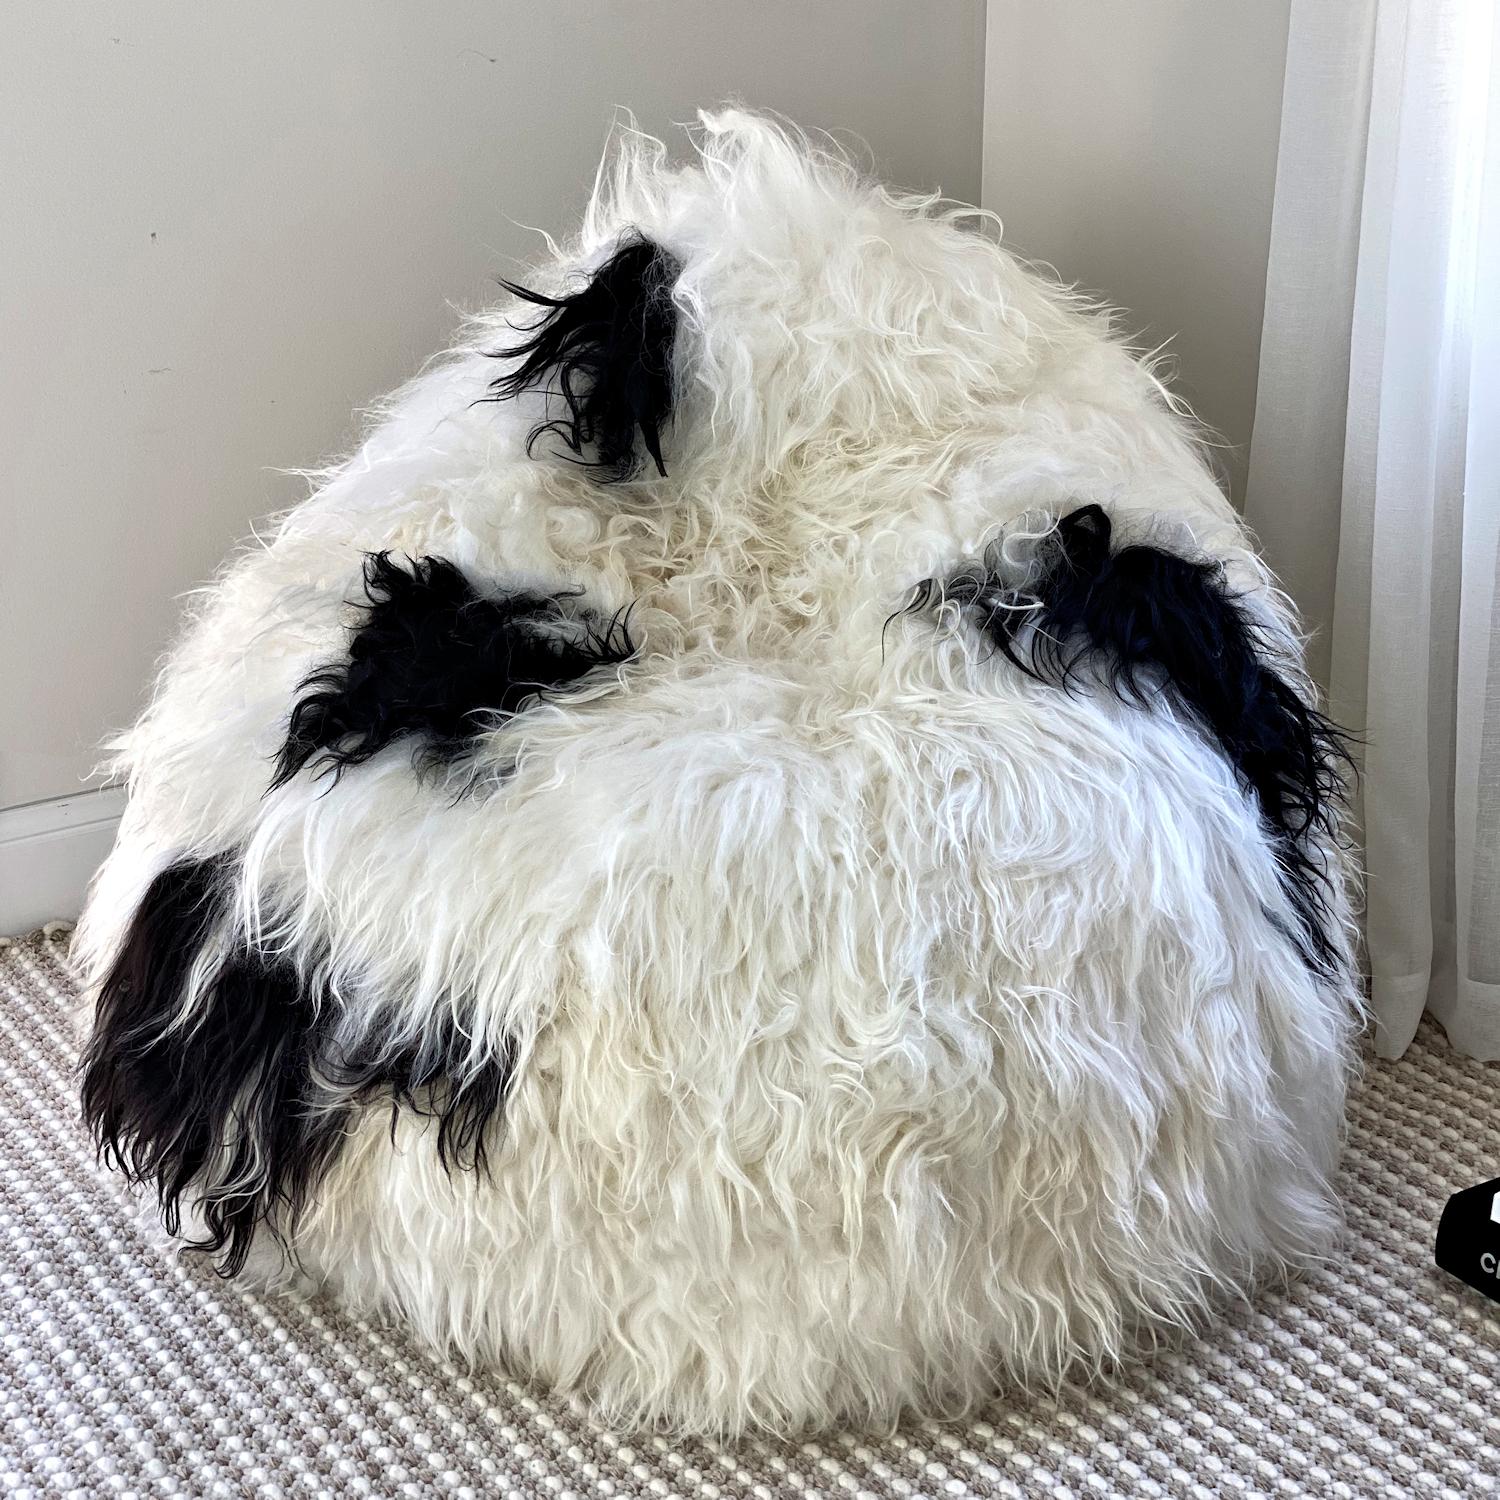 Imagine relaxing into this cozy genuine sheepskin beanbag while you unwind after a long and tiring day. This inviting shaggy bean bag chair is handcrafted from the finest long wool Icelandic sheepskin resulting in the most amazing shaggy and tactile